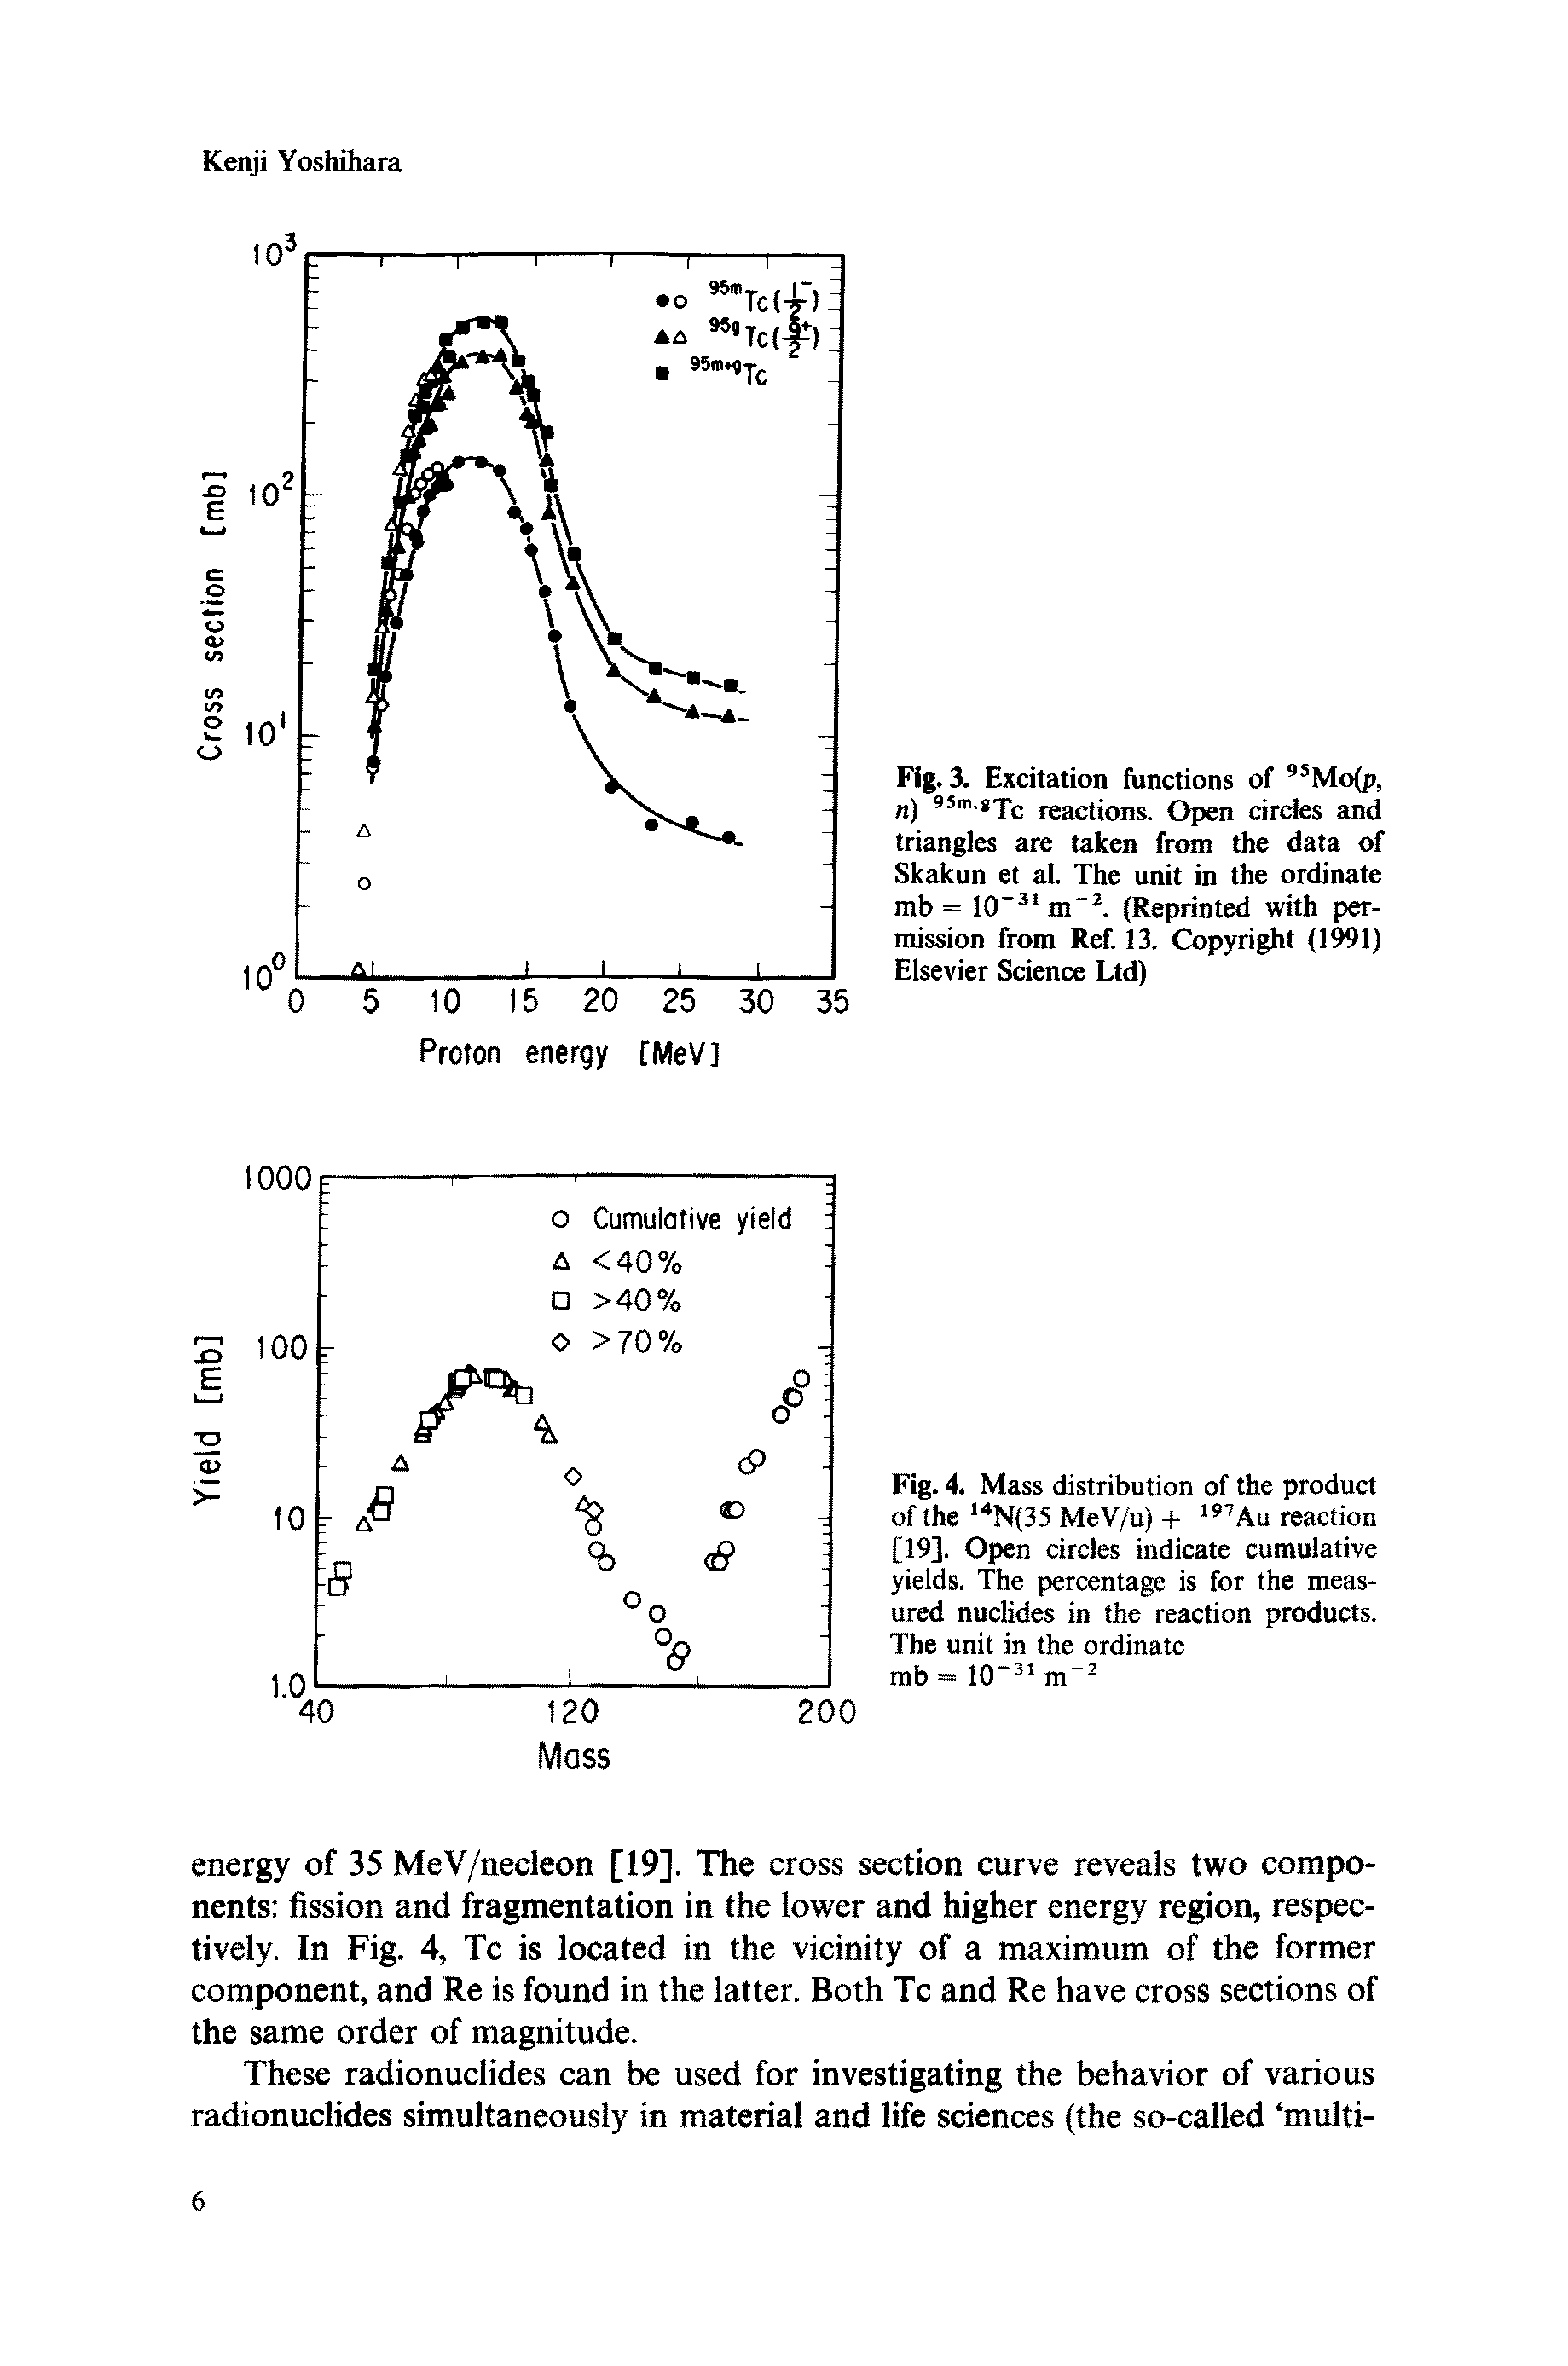 Fig. 3. Excitation functions of 95Mo(p, n) 95m Tc reactions. Open circles and triangles are taken from the data of Skakun et al. The unit in the ordinate mb = 1CT31 mJ. (Reprinted with permission from Ref. 13. Copyright (1991) Elsevier Science Ltd)...